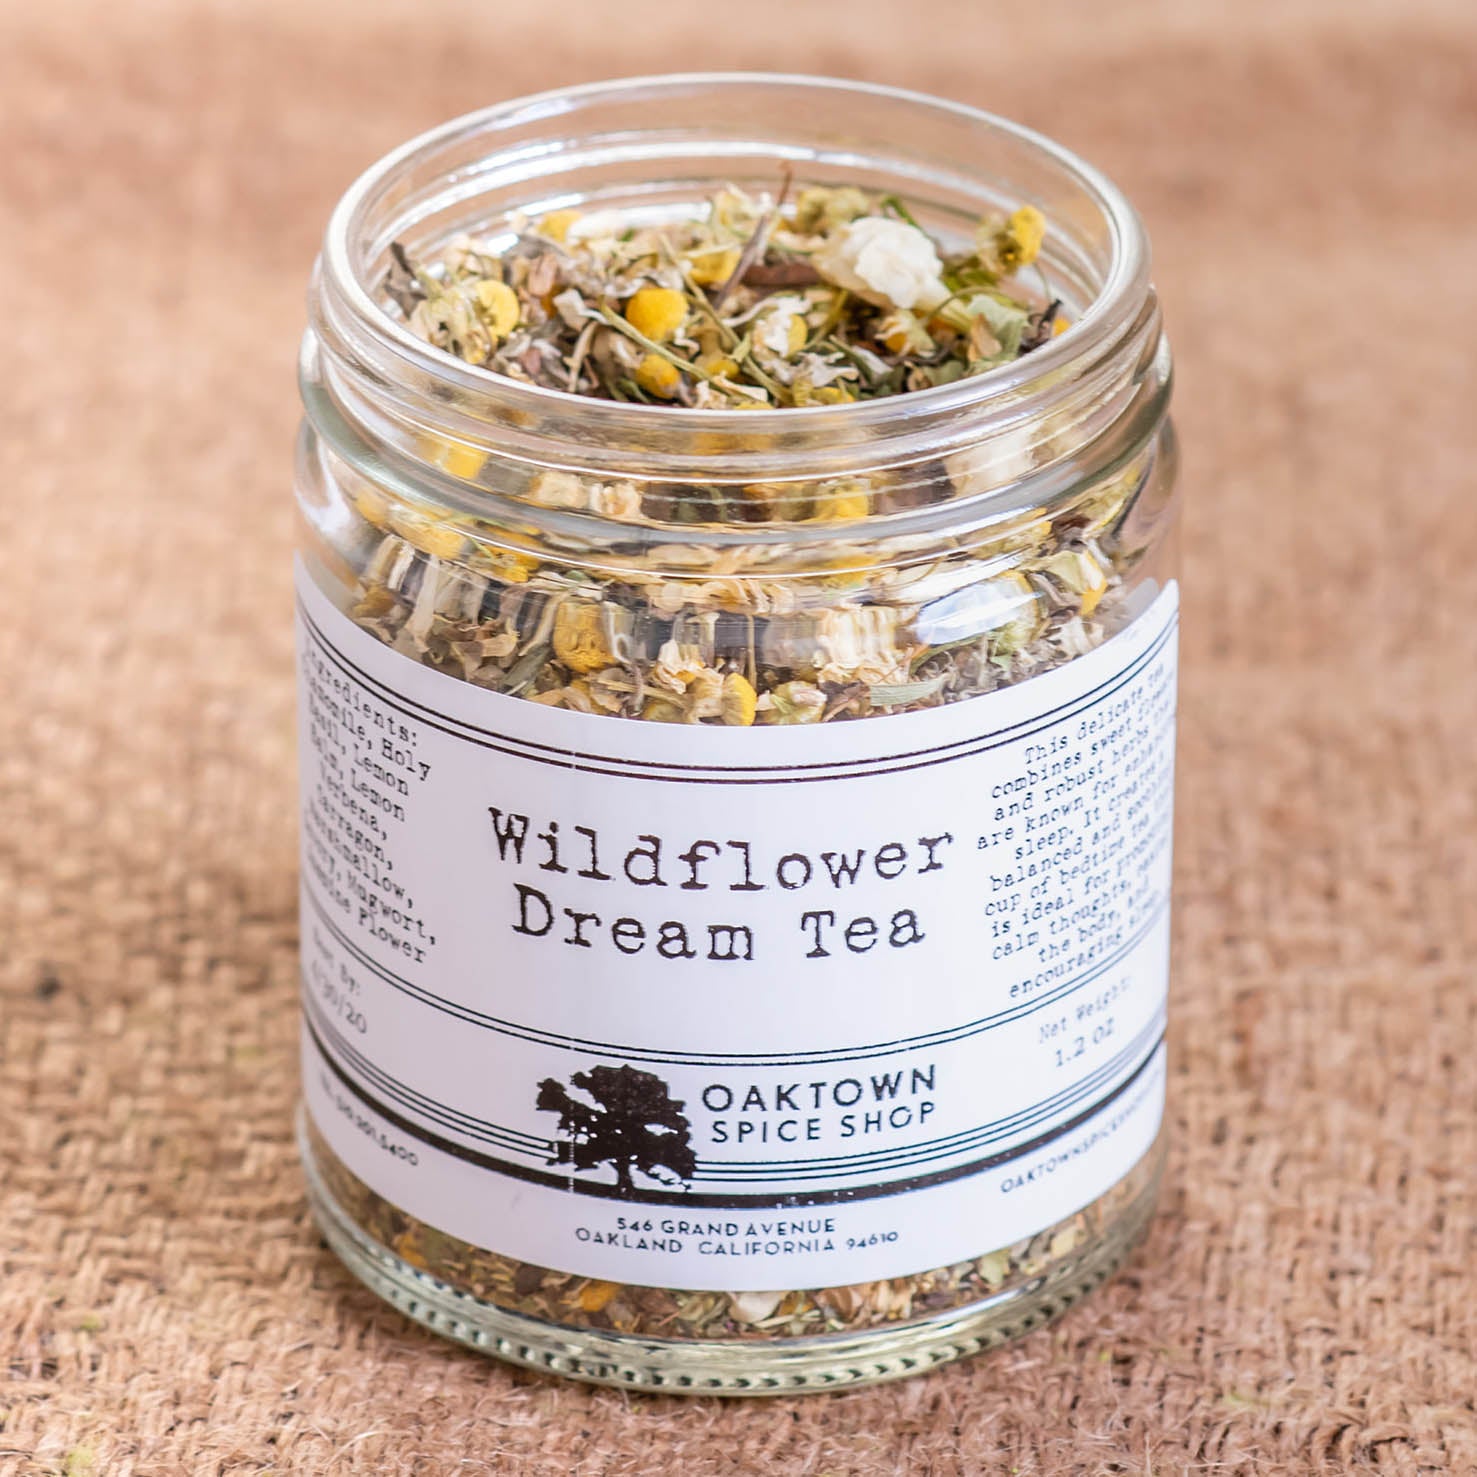 A glass jar filled with Wildflower Dream Tea. Our Wildflower Dream Tea tea combines sweet flowers and robust herbs that are known for enhancing sleep. It creates a balanced and soothing cup of bedtime tea that is ideal for promoting calm thoughts, easing the body, and encouraging sleep. Ingredients are Chamomile, Holy Basil, Lemon Balm, Lemon Verbena, Tarragon, Marshmallow, Savory, Mugwort and Jasmine Flower.